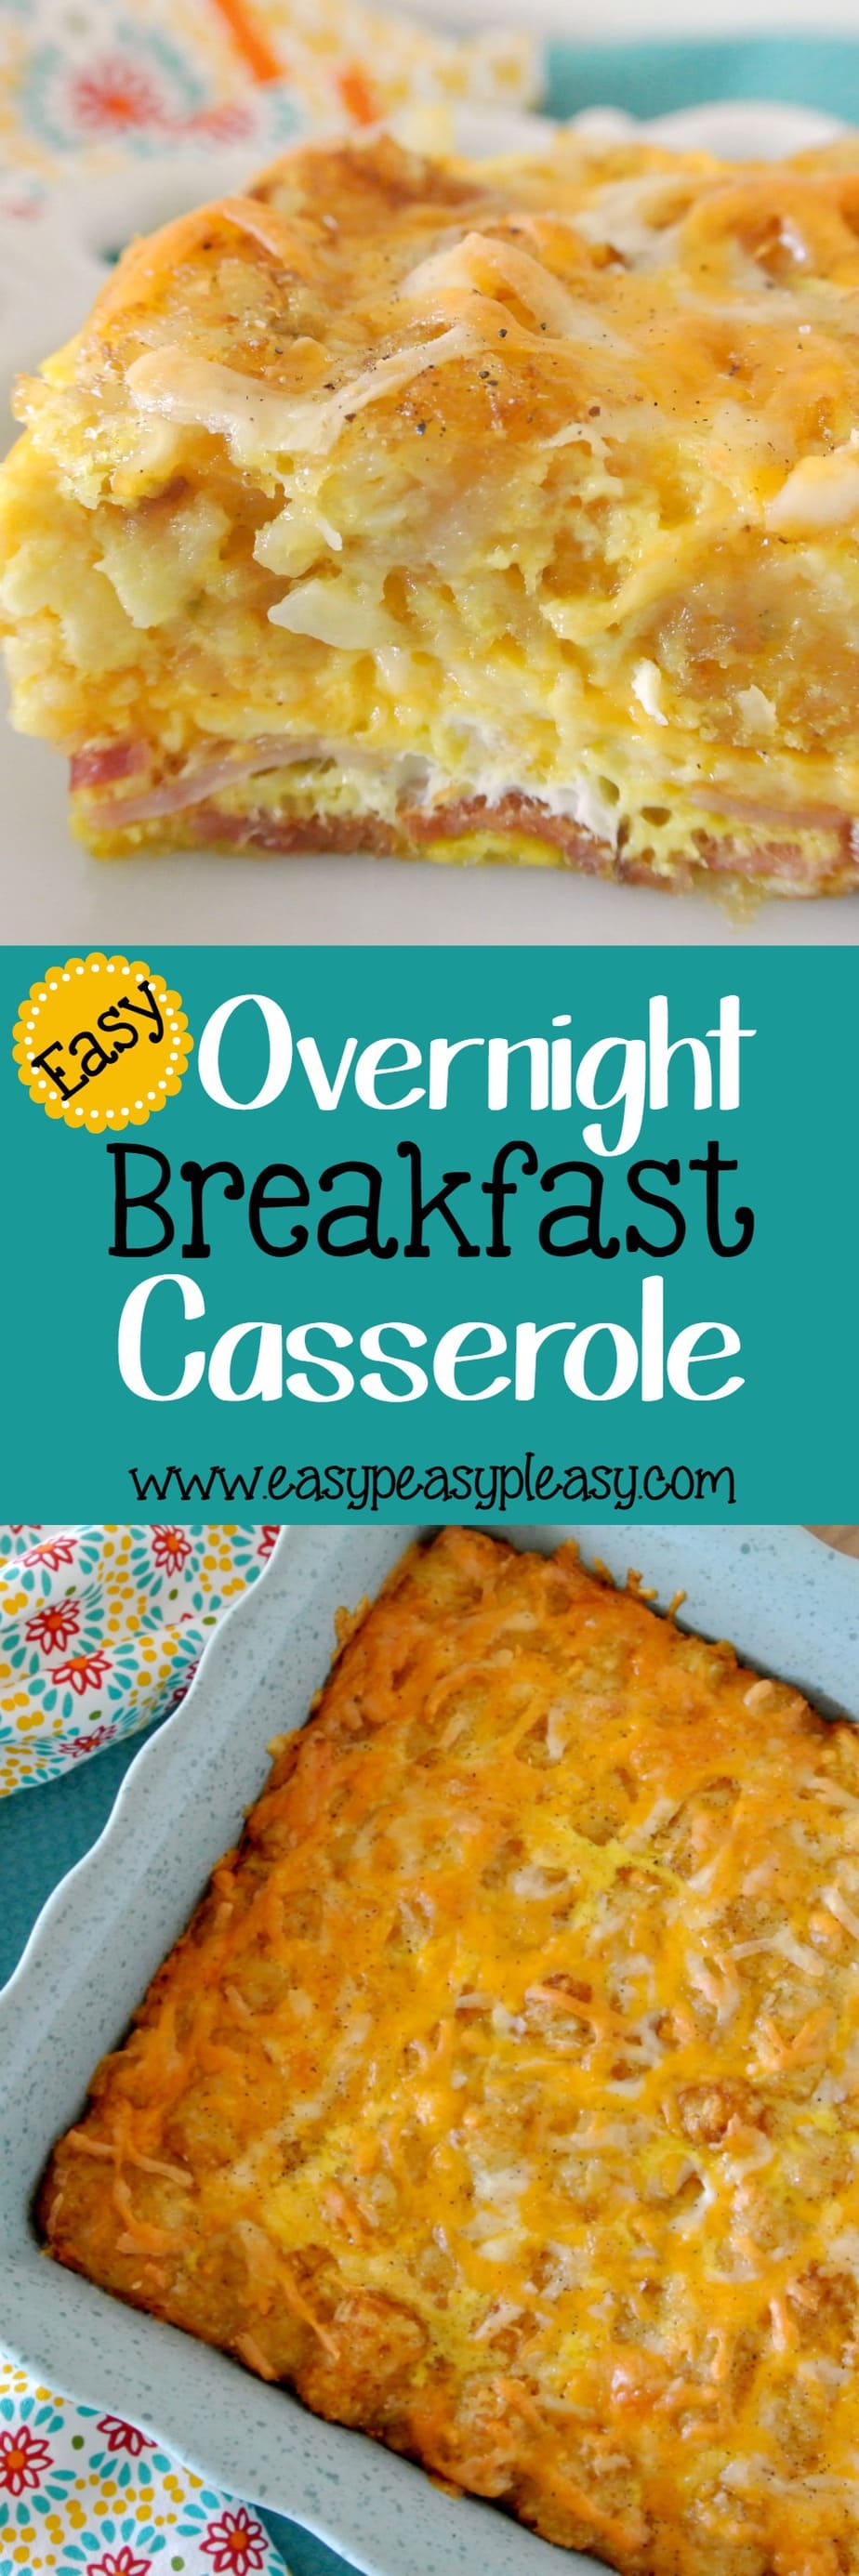 This easy overnight breakfast casserole is the perfect dish to prepare the night before and throw in the oven the morning for a hot breakfast! It's the perfect hearty and delicious 4 ingredient breakfast!